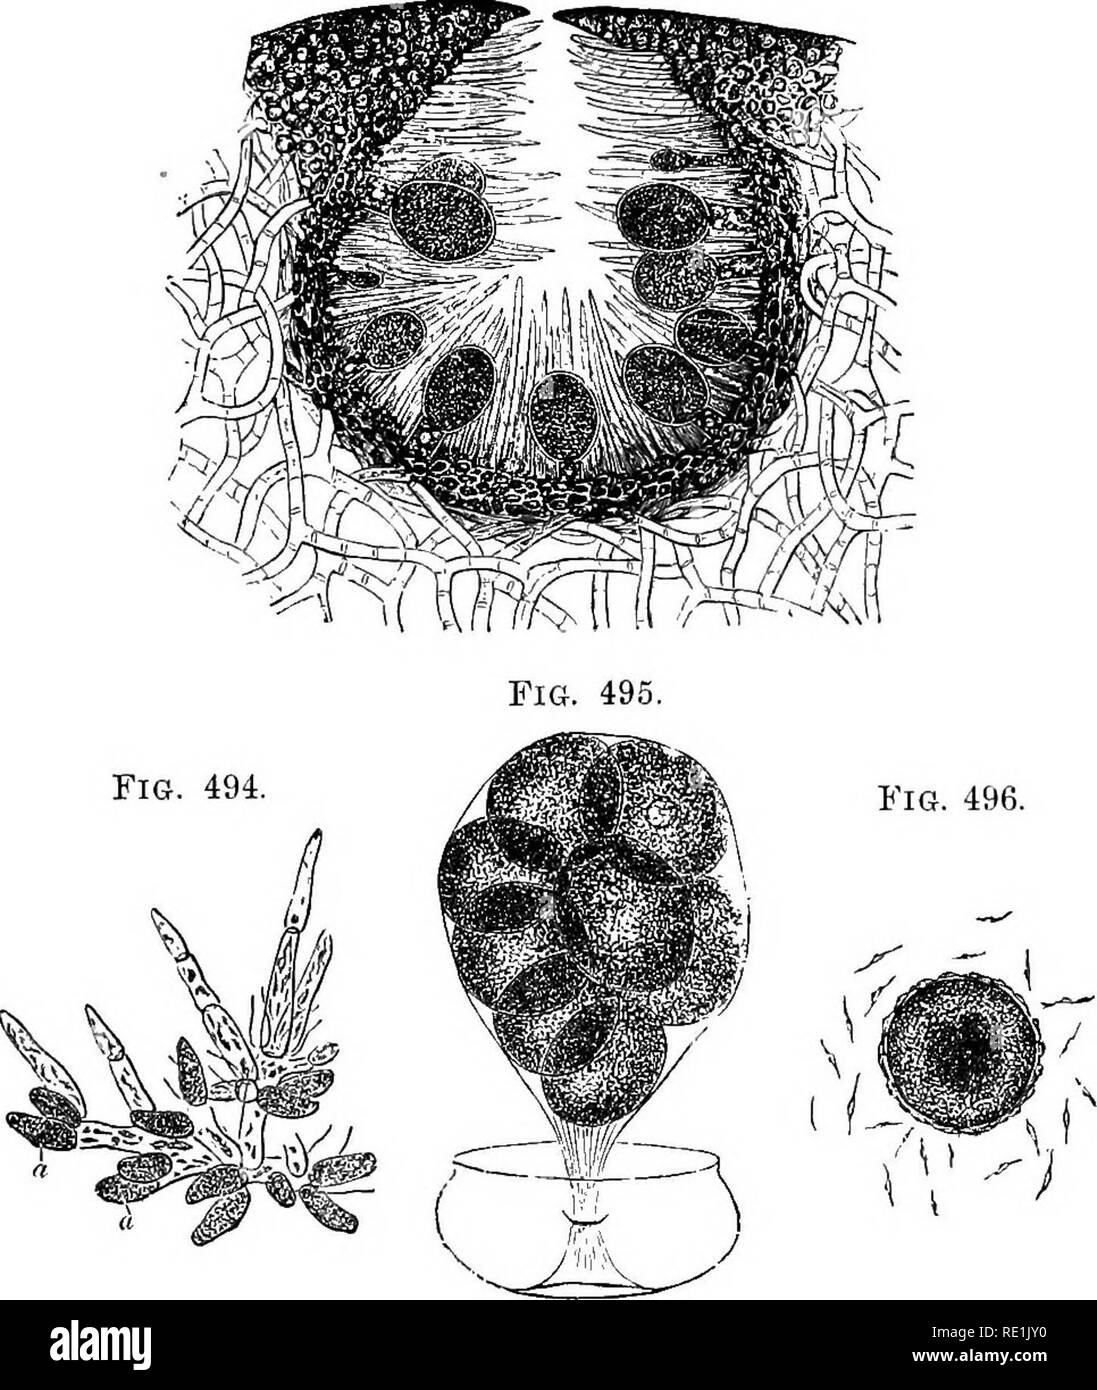 . A manual of botany. Botany. MOEPHOLOGY OF BEPRODUCTIVE ORGANS 229 contains no differentiated oosphere. It is a unioelMar or multi- cellular structure known as a procarp (fig. 498), and consists Fig. 493.. Fig. 496. ^ (V-^^ Fig. 493. Vertical section of a female conceptacle of Fitcus vesiculostis contairuug oogonia and paraphyses. After Thnret. Fig. 494. Antheridia, a, a, on the branched hairs of the male conceptacle. After Thnret. Fig. 495. Oogonium with the oospheres fnlly differen- tiated and disengaging themselves from their coverings. After Thnret. Fig, 496. An oosphere surrounded by a n Stock Photo